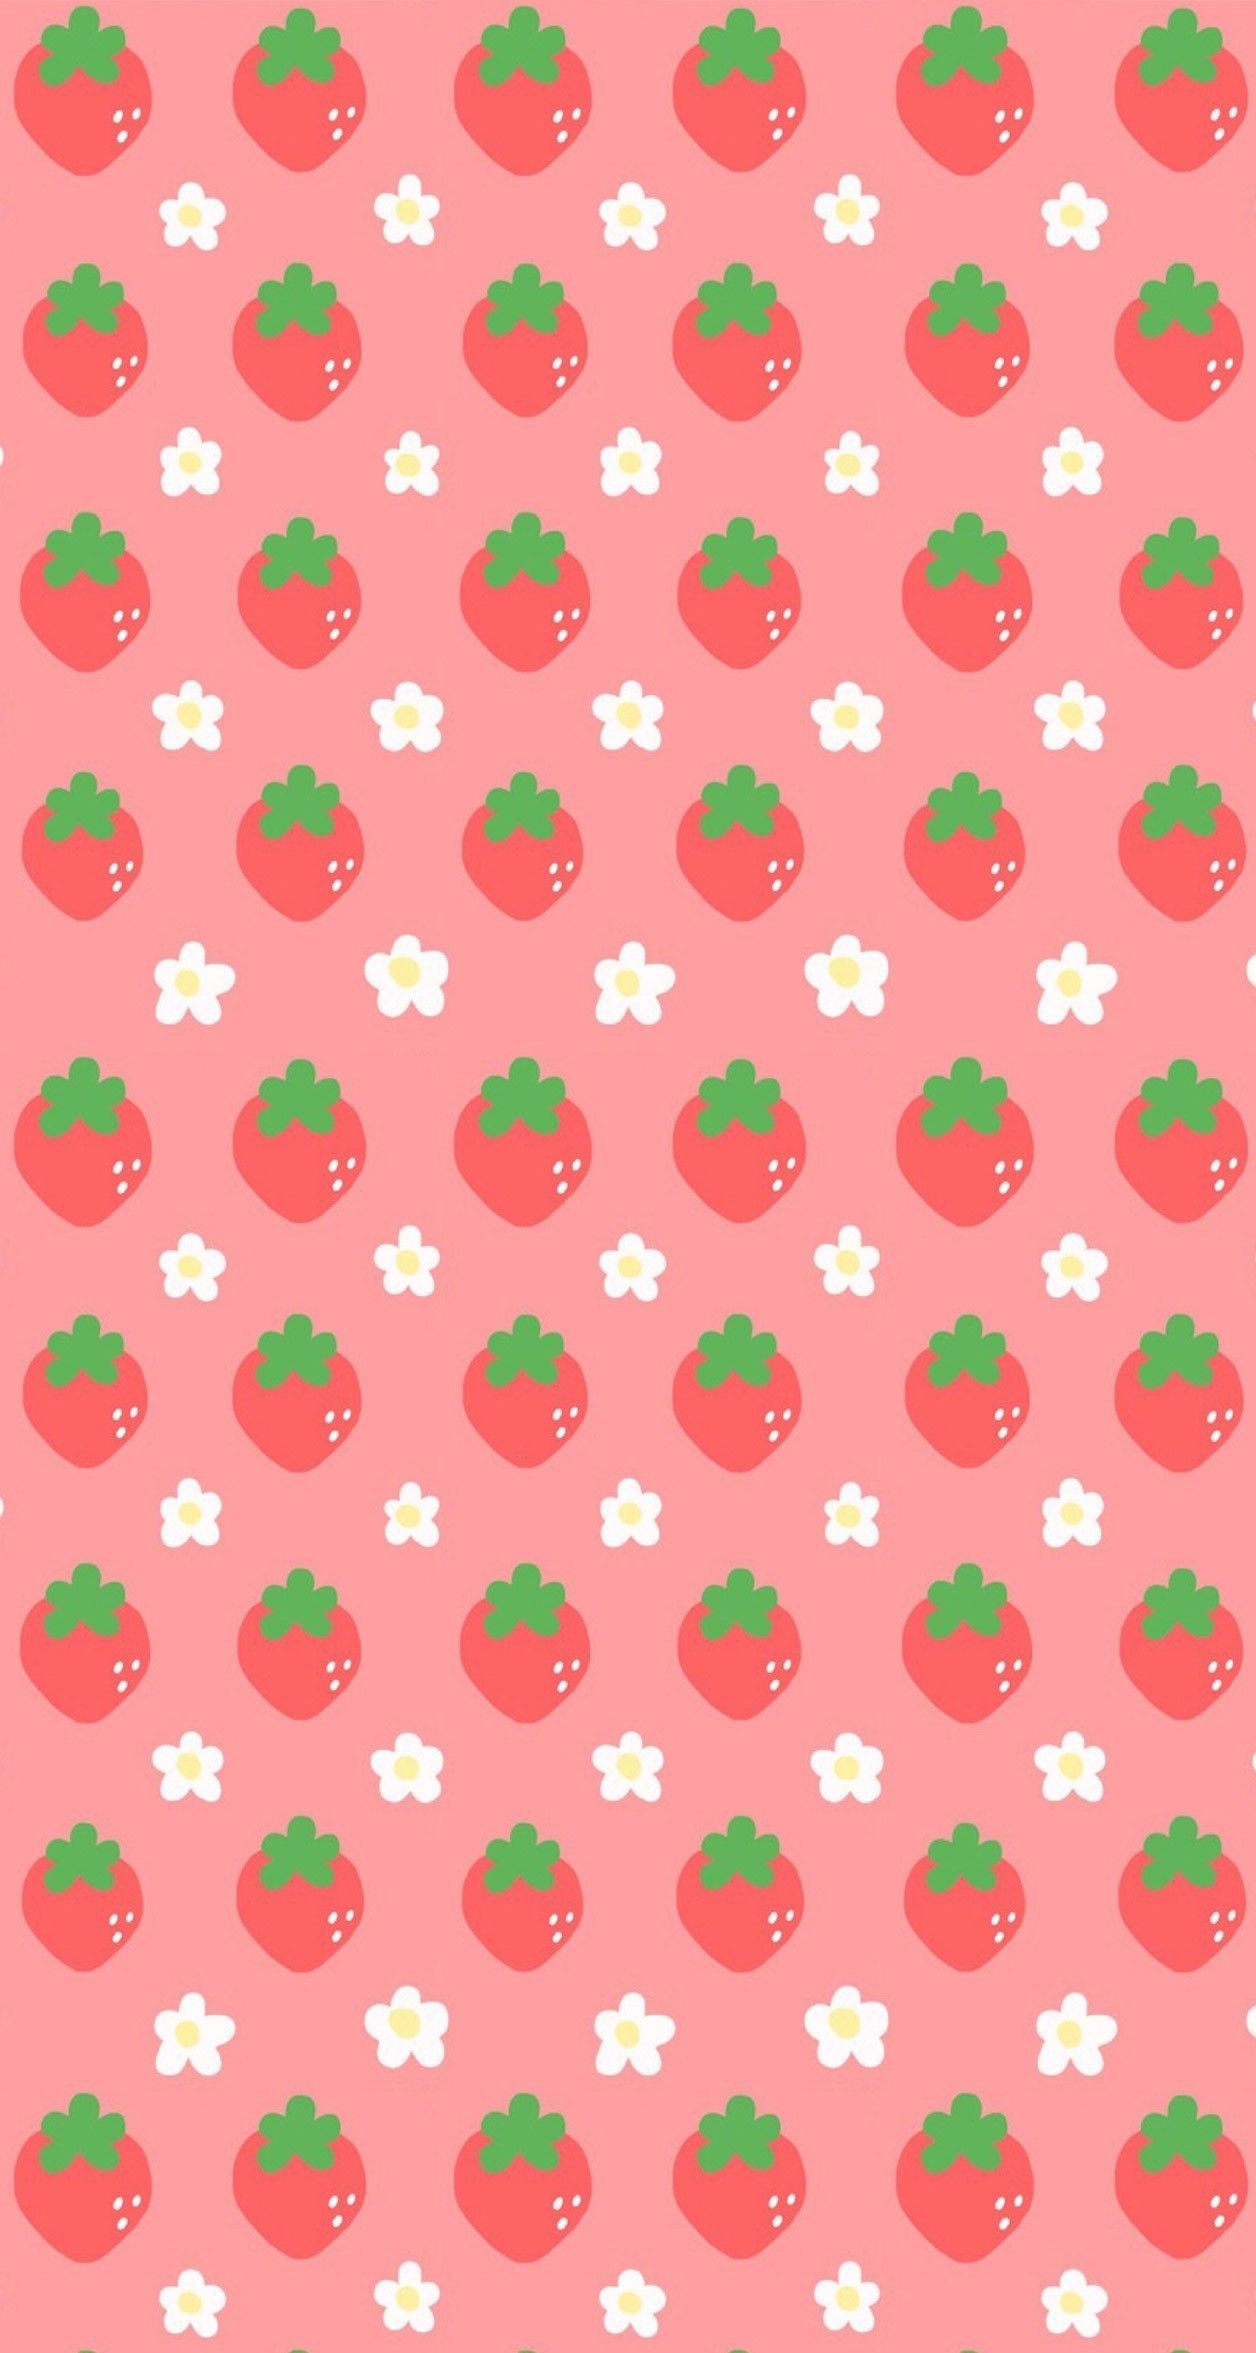 A pattern of strawberries and flowers on pink background - Avocado